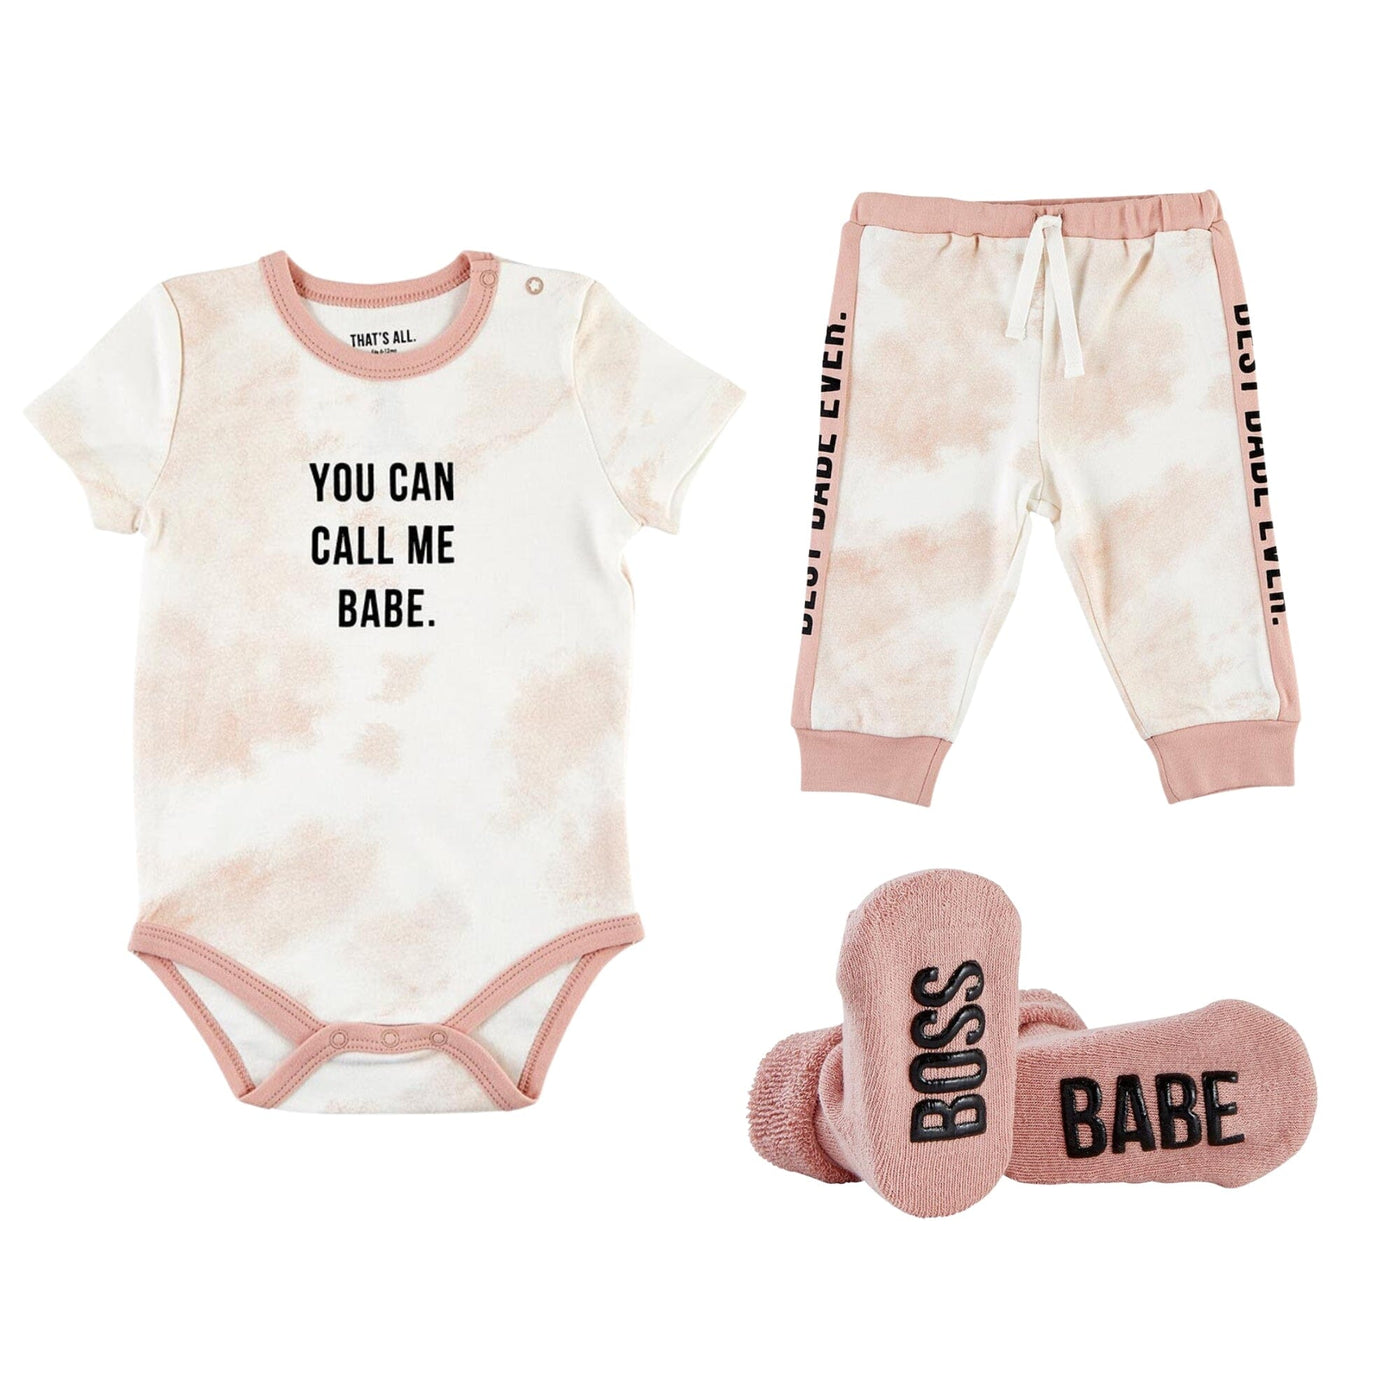 Blush Tie Dye Baby Outfit Set - You Can Call Me Babe Clothing Stephan Baby Pink 